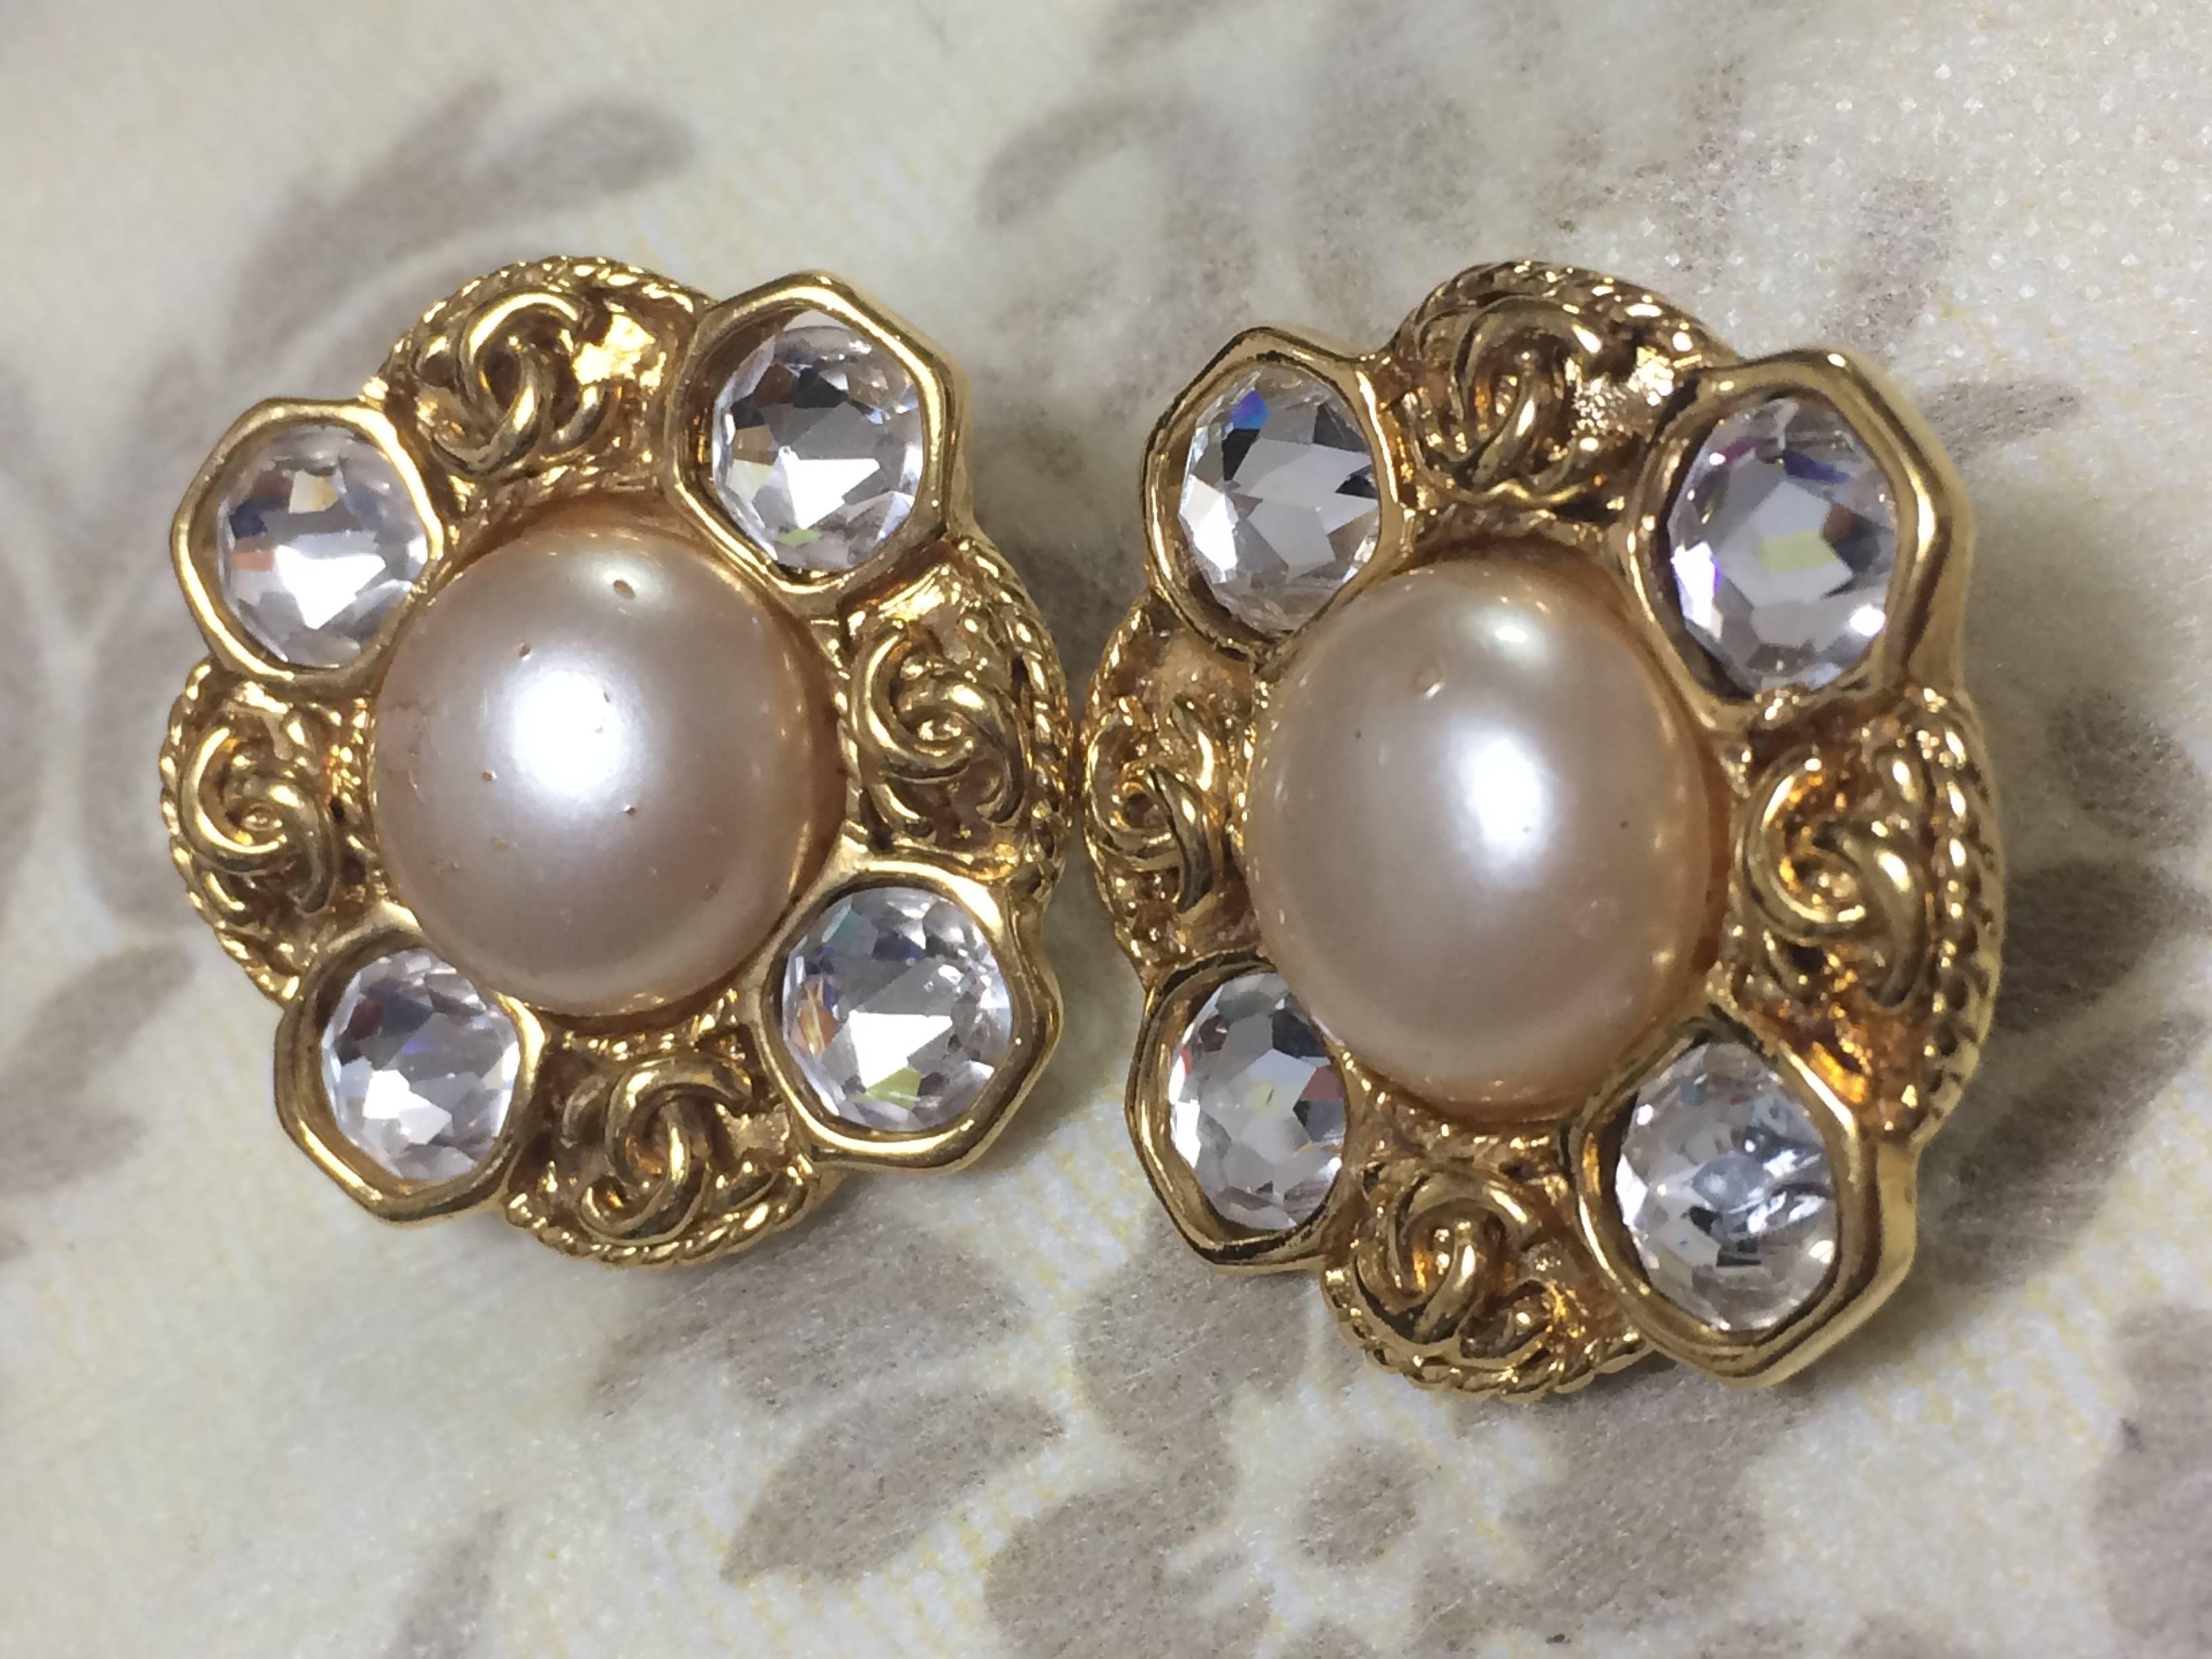 1990s. Vintage CHANEL gold tone earrings with a faux pearl, Swarovski crystal stones, and CC motifs. Great and rare Chanel vintage gift.

Fun and Chic and Gorgeous CHANEL earrings for  you or your loved one!  
Great gift idea. 

Introducing a